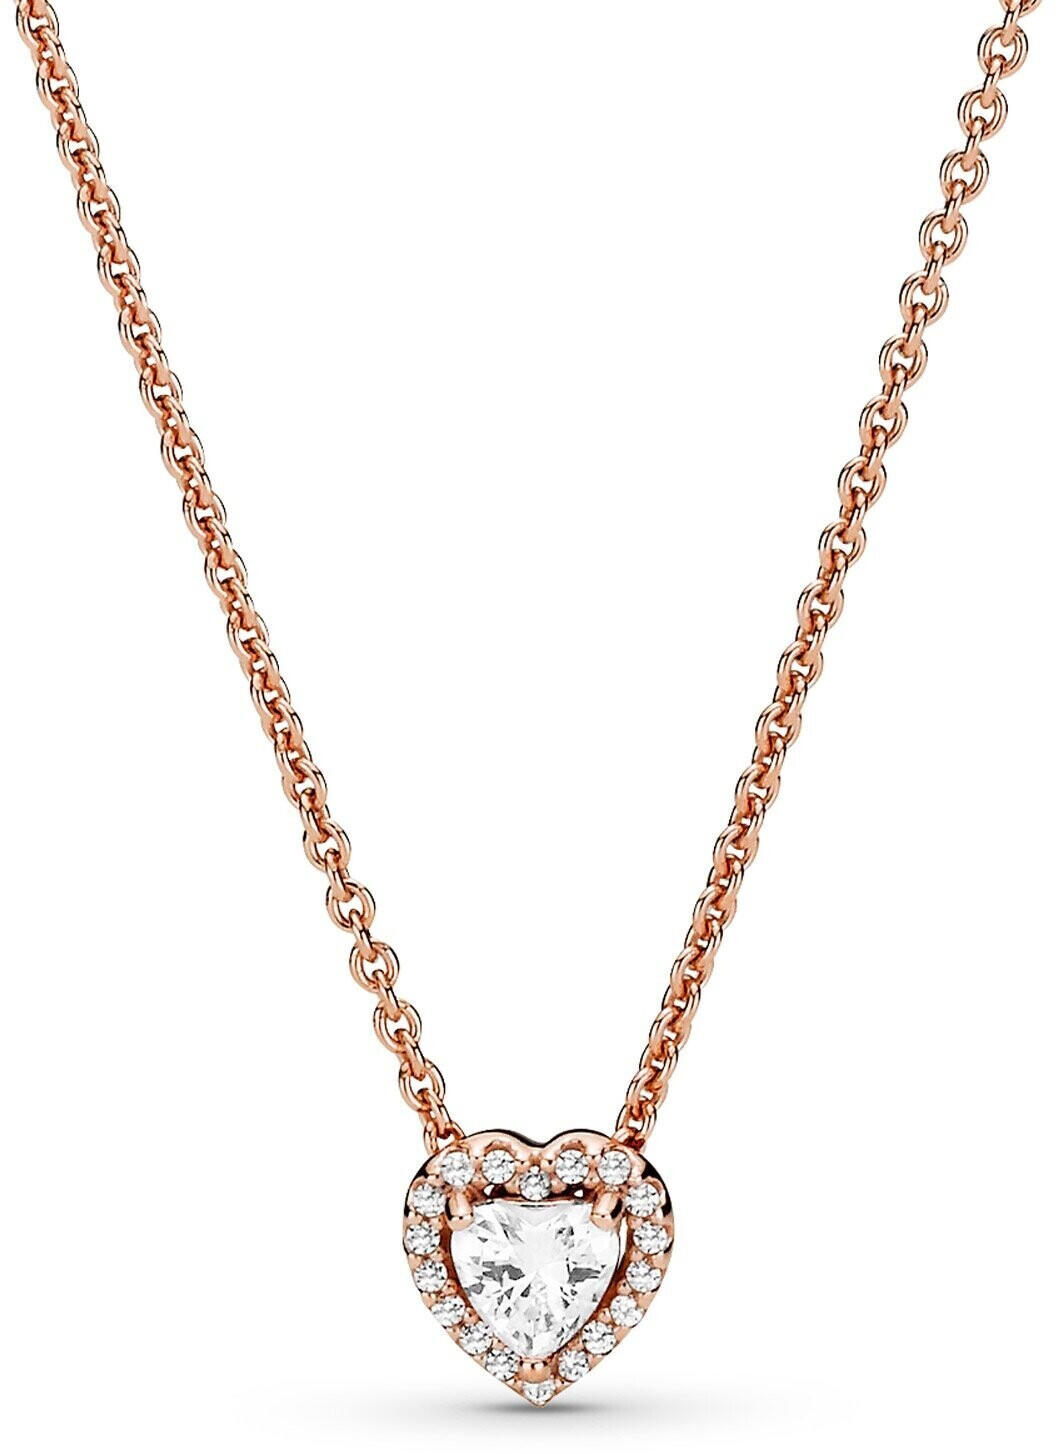 Pandora Sparkling Heart Collier Necklace Rose gold plated